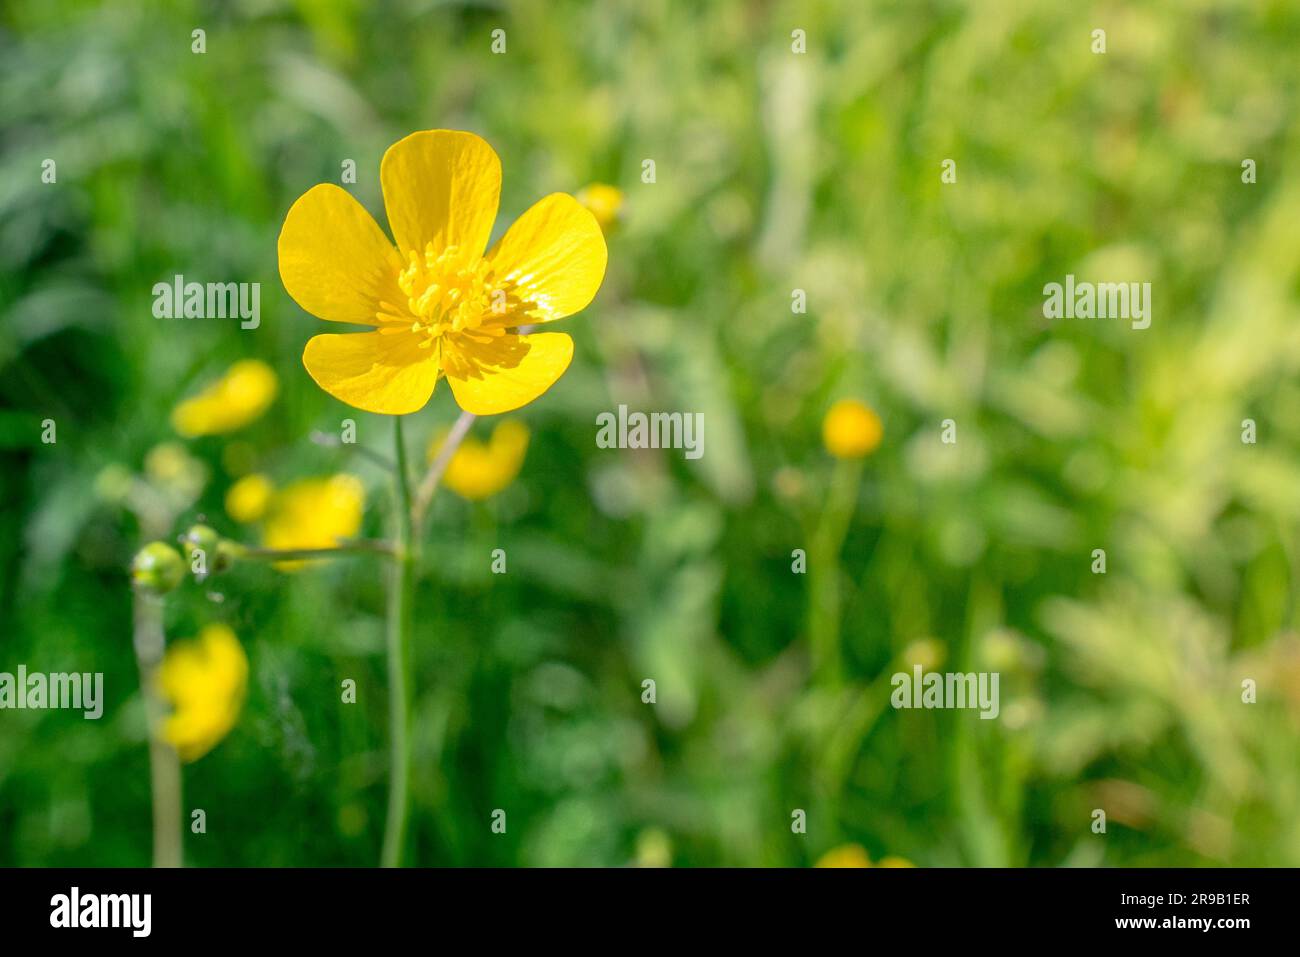 Yellow buttercup flower in natural green surroundings Stock Photo